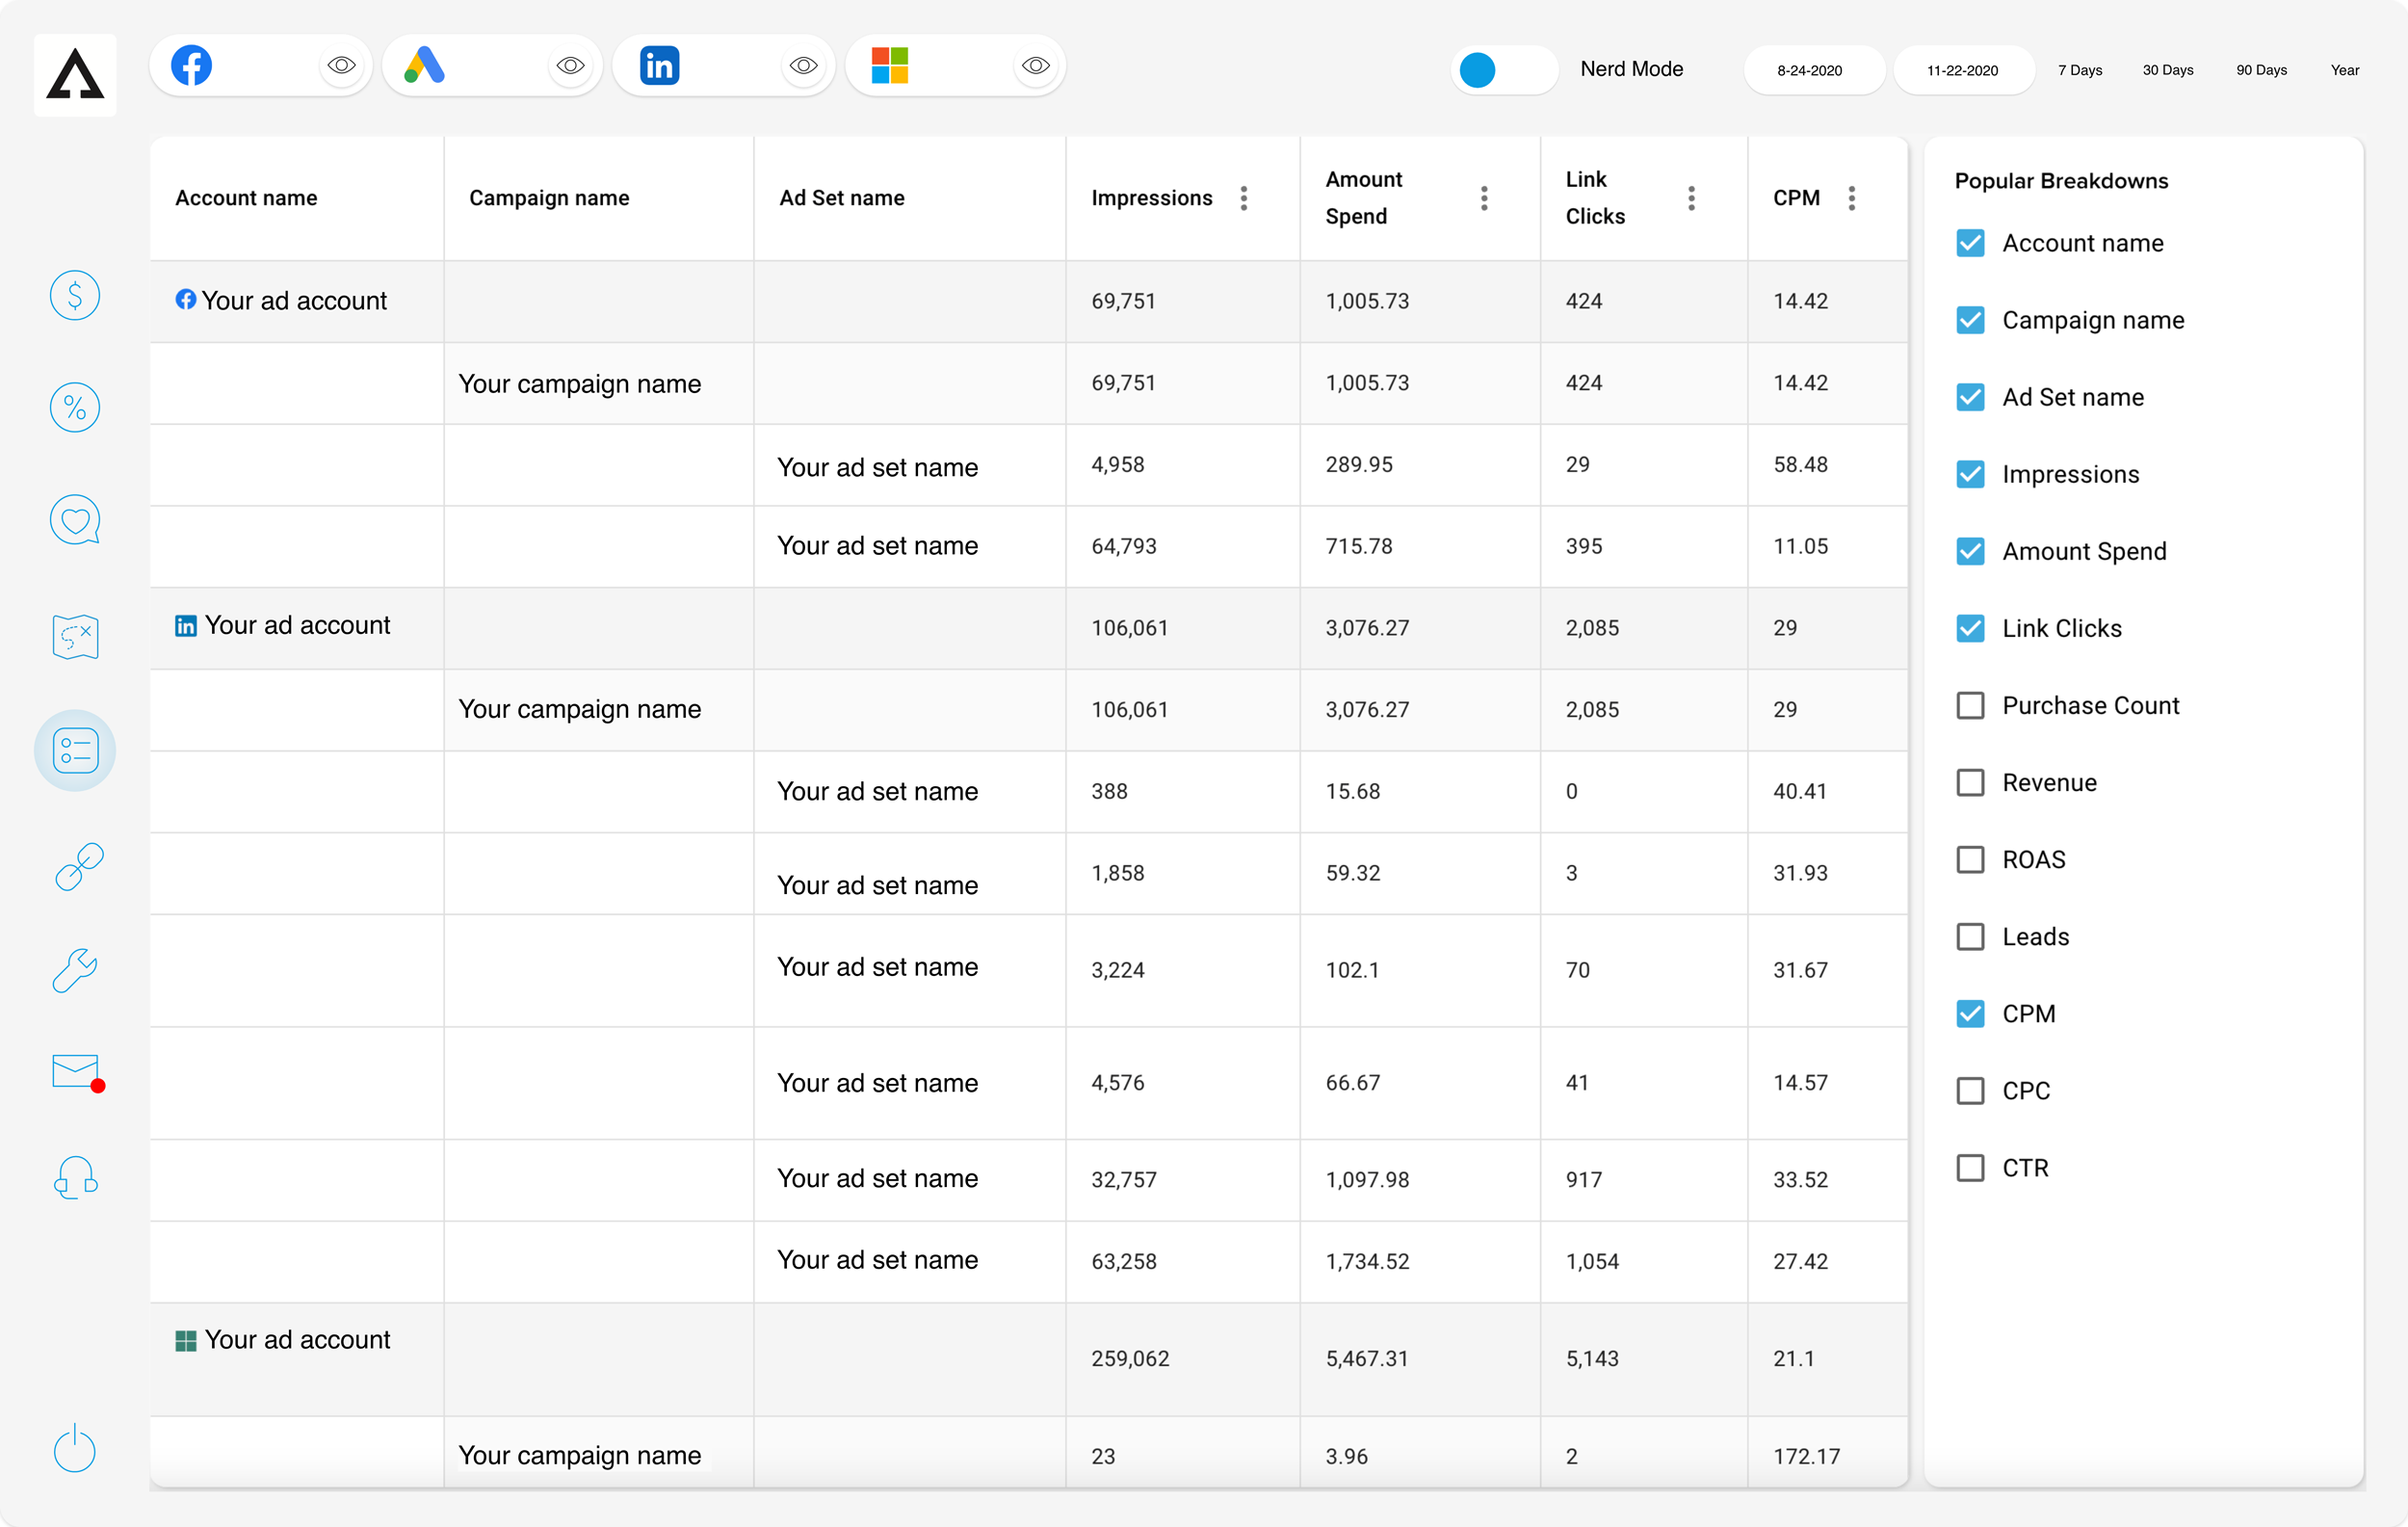 Report tables with cross-platform data, unified and organized across all your channels. Sort by KPIs of your pick. Downloadable as a CSV!